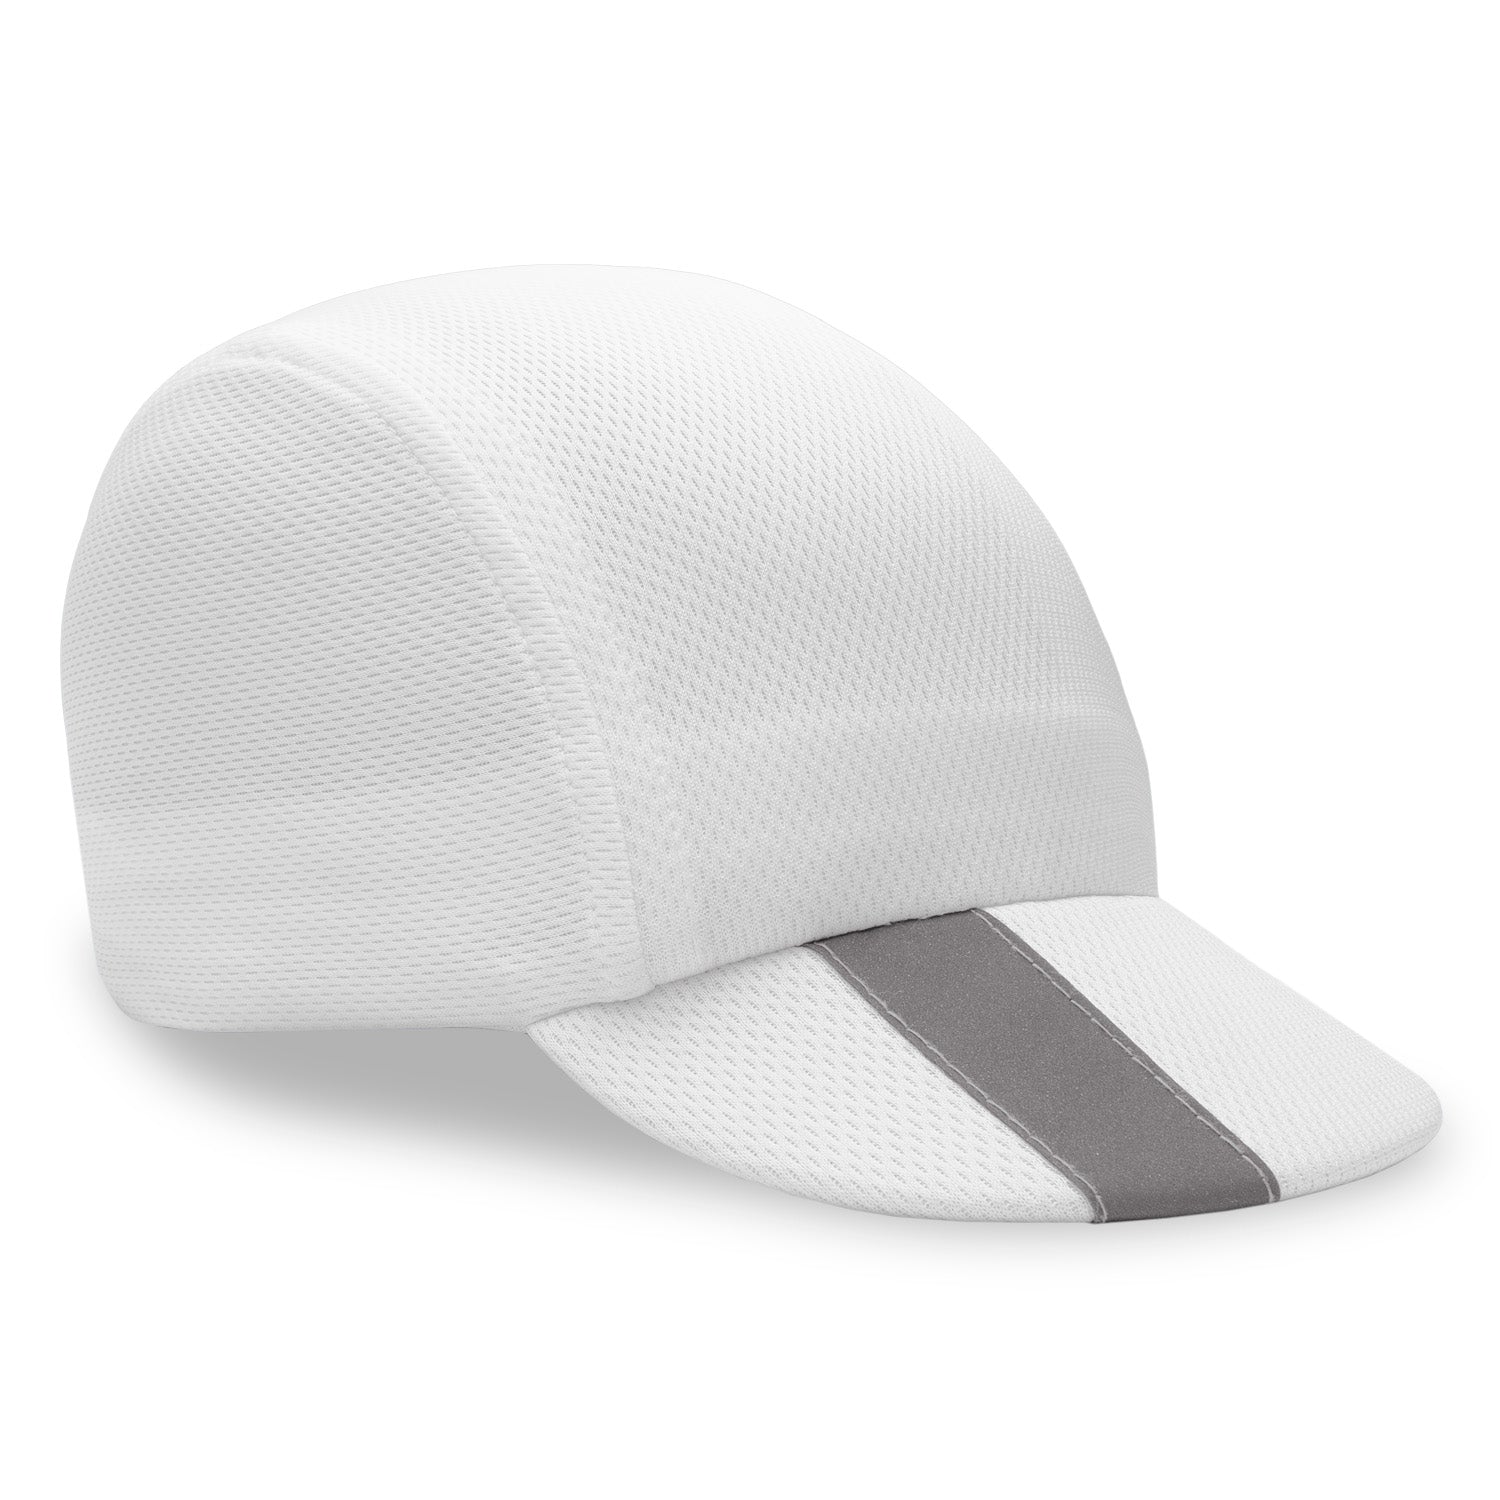 Voorstellen Maestro dubbel Cycle Cap | Cycling Caps | White Cycling Cap - Headsweats